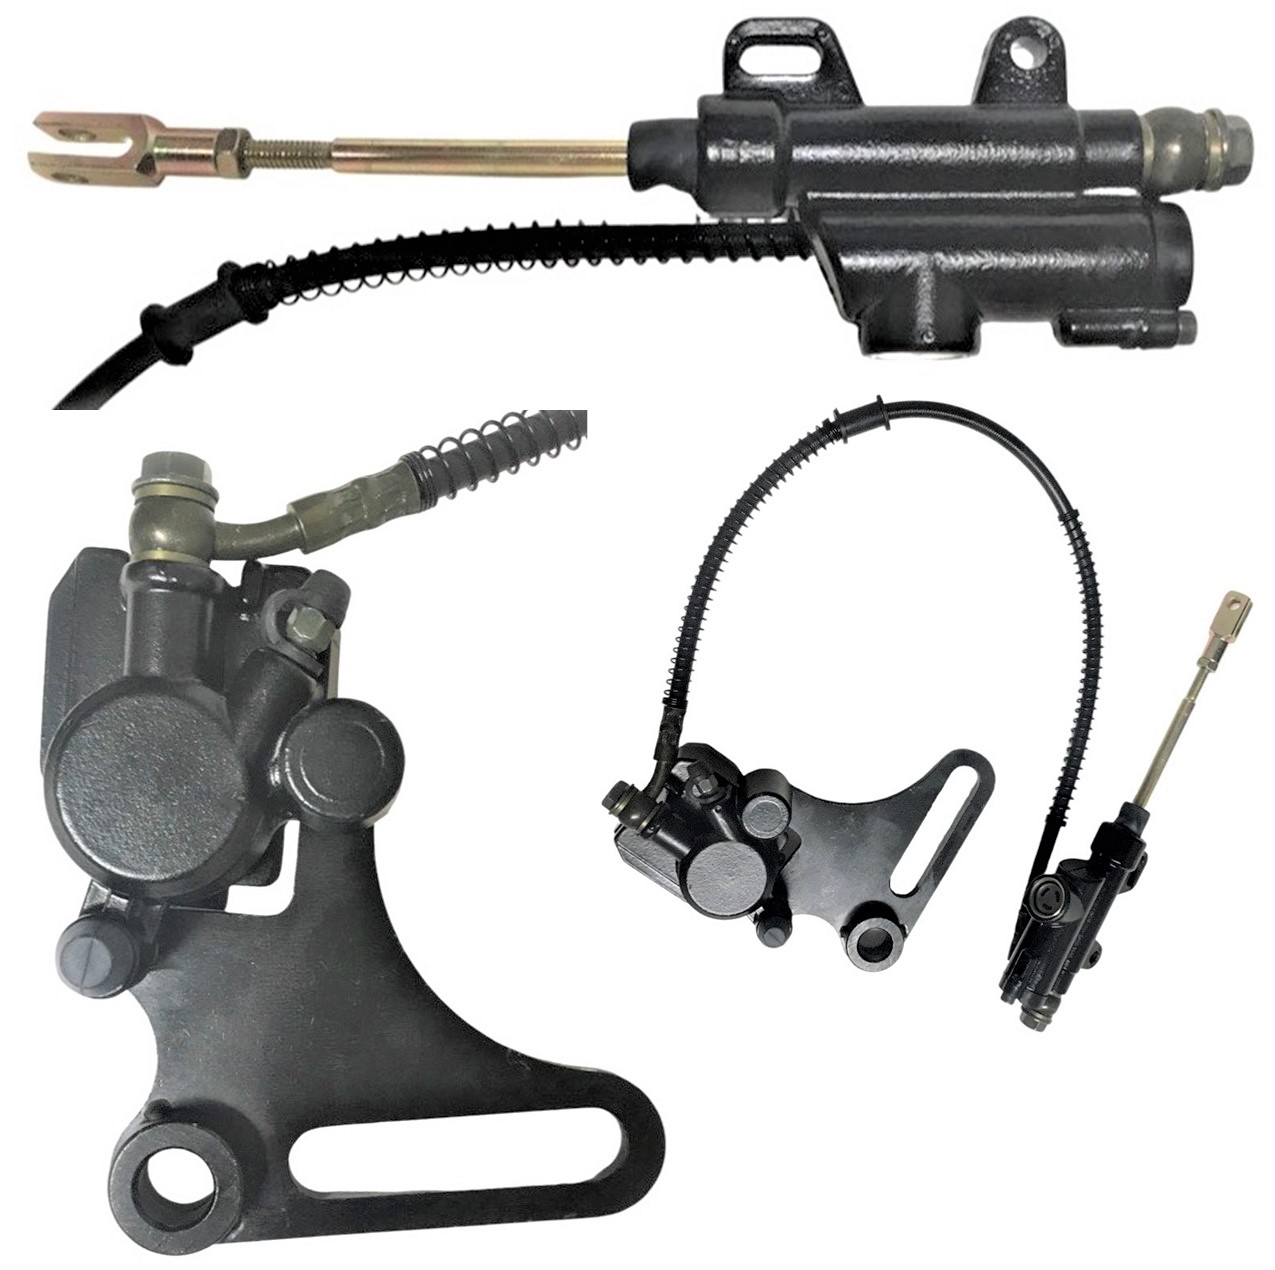 Rear Foot Brake Assembly Fits Many ATVs & DirtBikes Caliper Bolts c/c=25-86mm, Line L=22in, Master Cylinder Bolts c/c=40-55mm, Rod Length-From Body to Center of Connector Hole=105mm - Click Image to Close